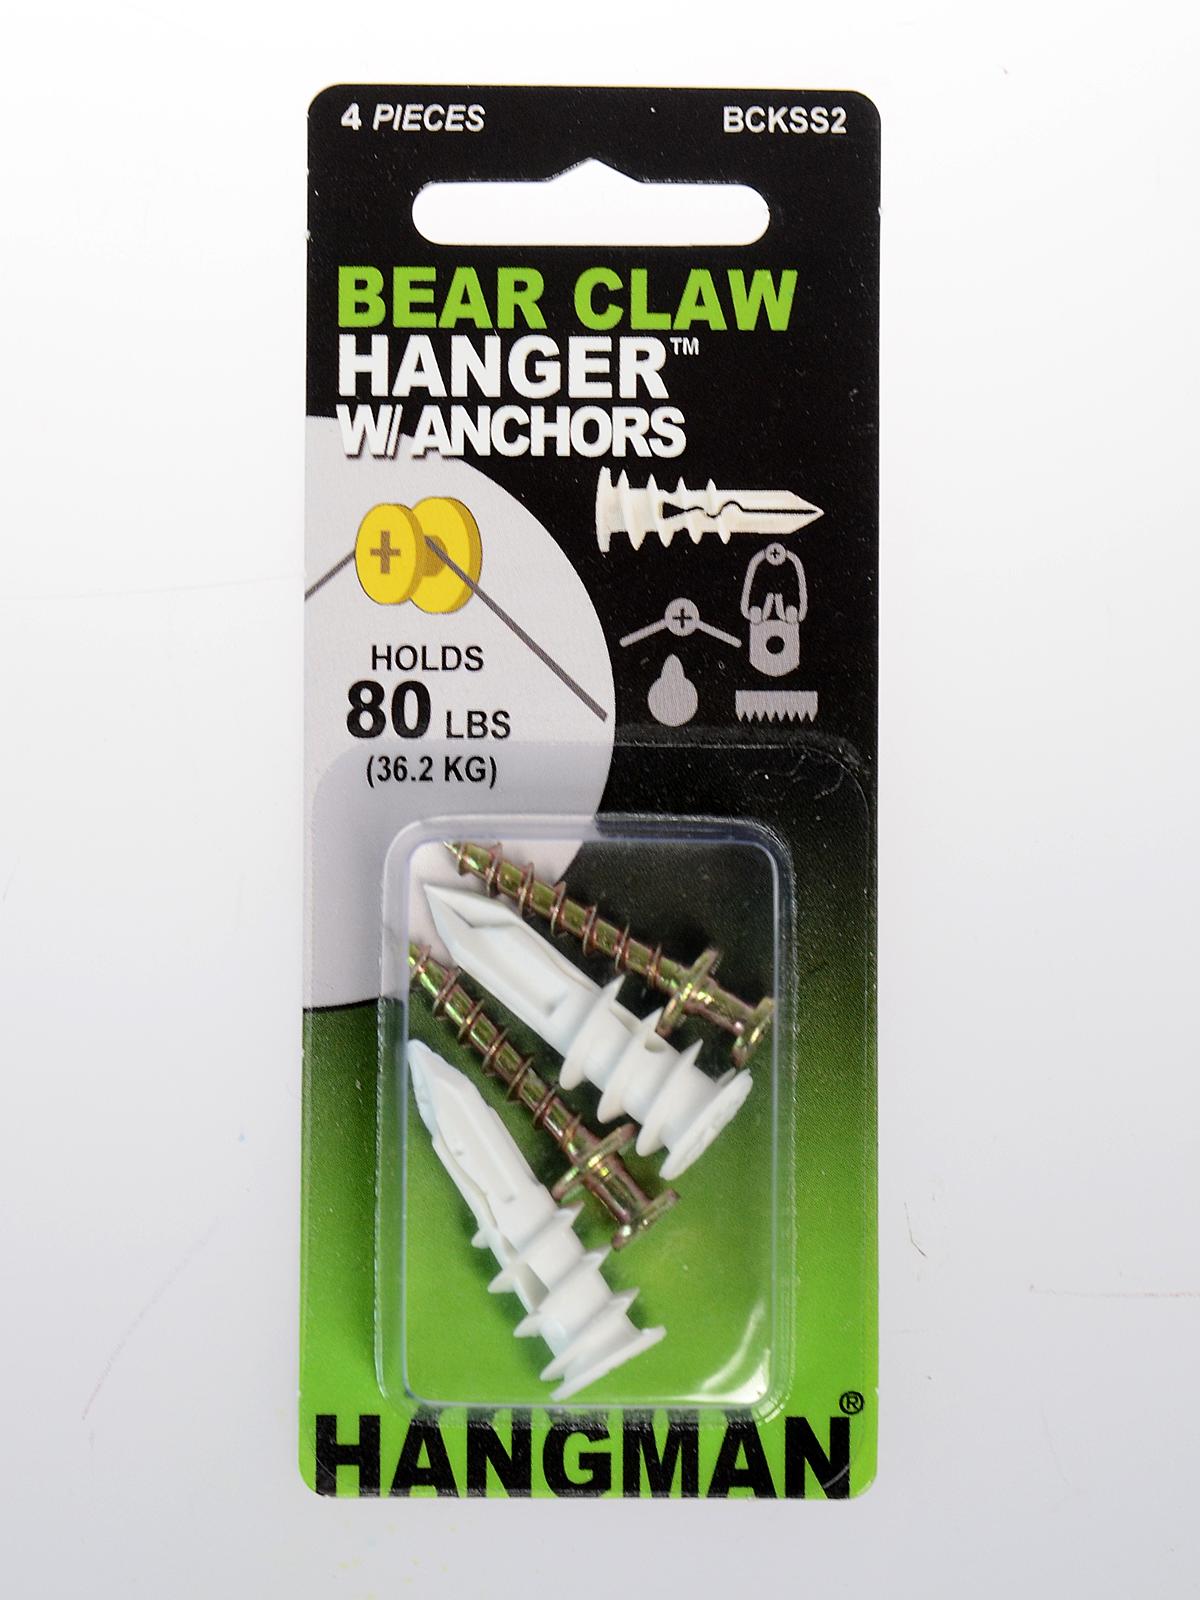 Bearclaw Hanger Hangers And Anchors; Gold Pack Of 2